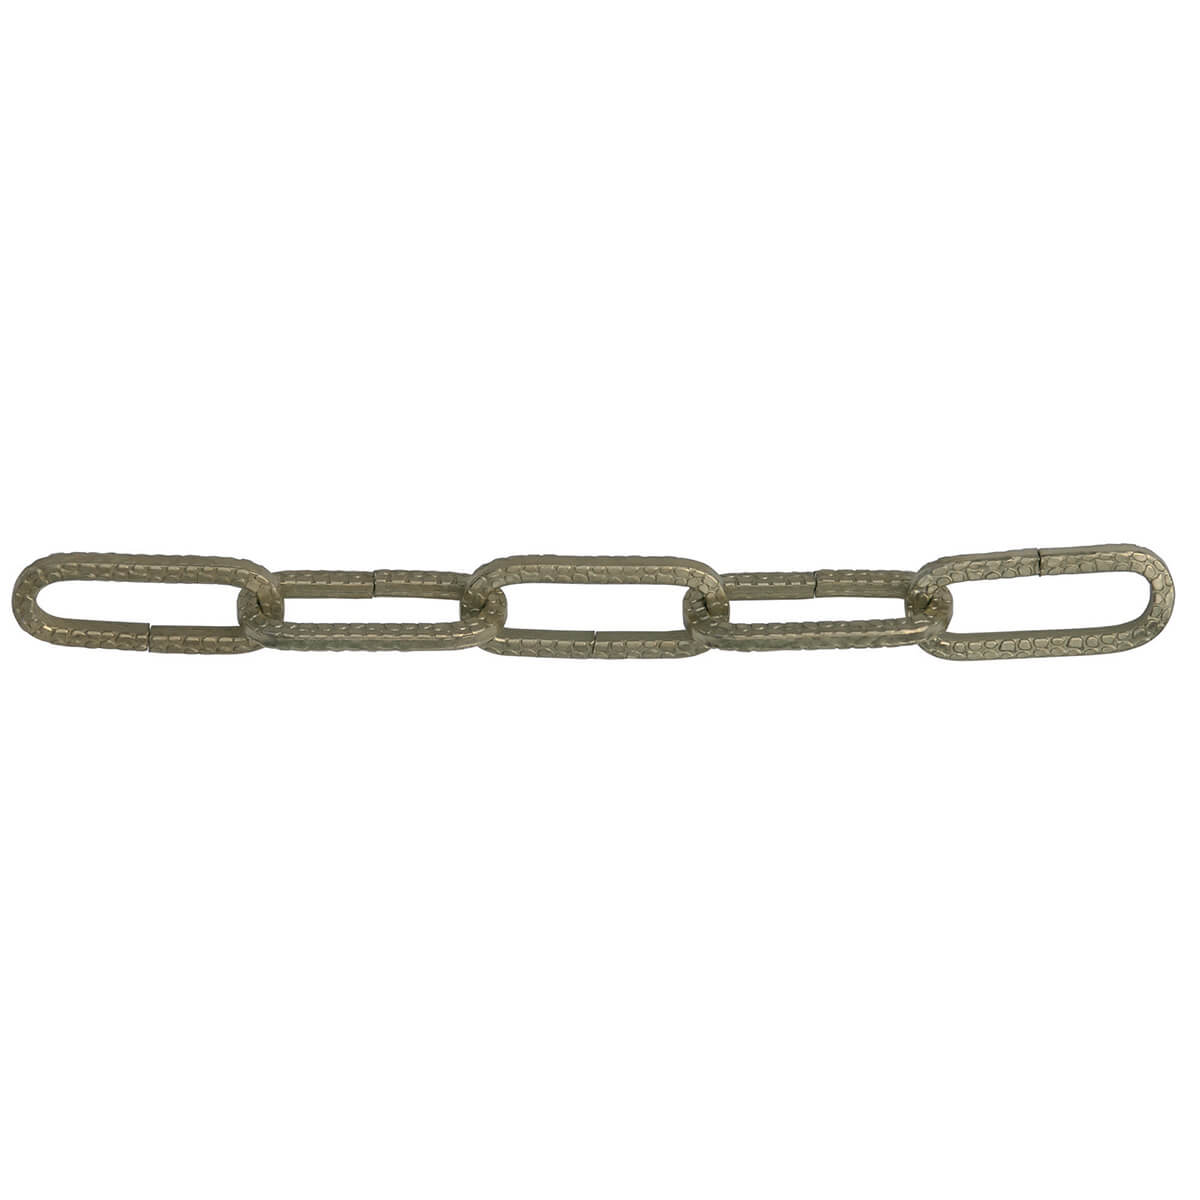 Dimpled Oval Chain - Steel